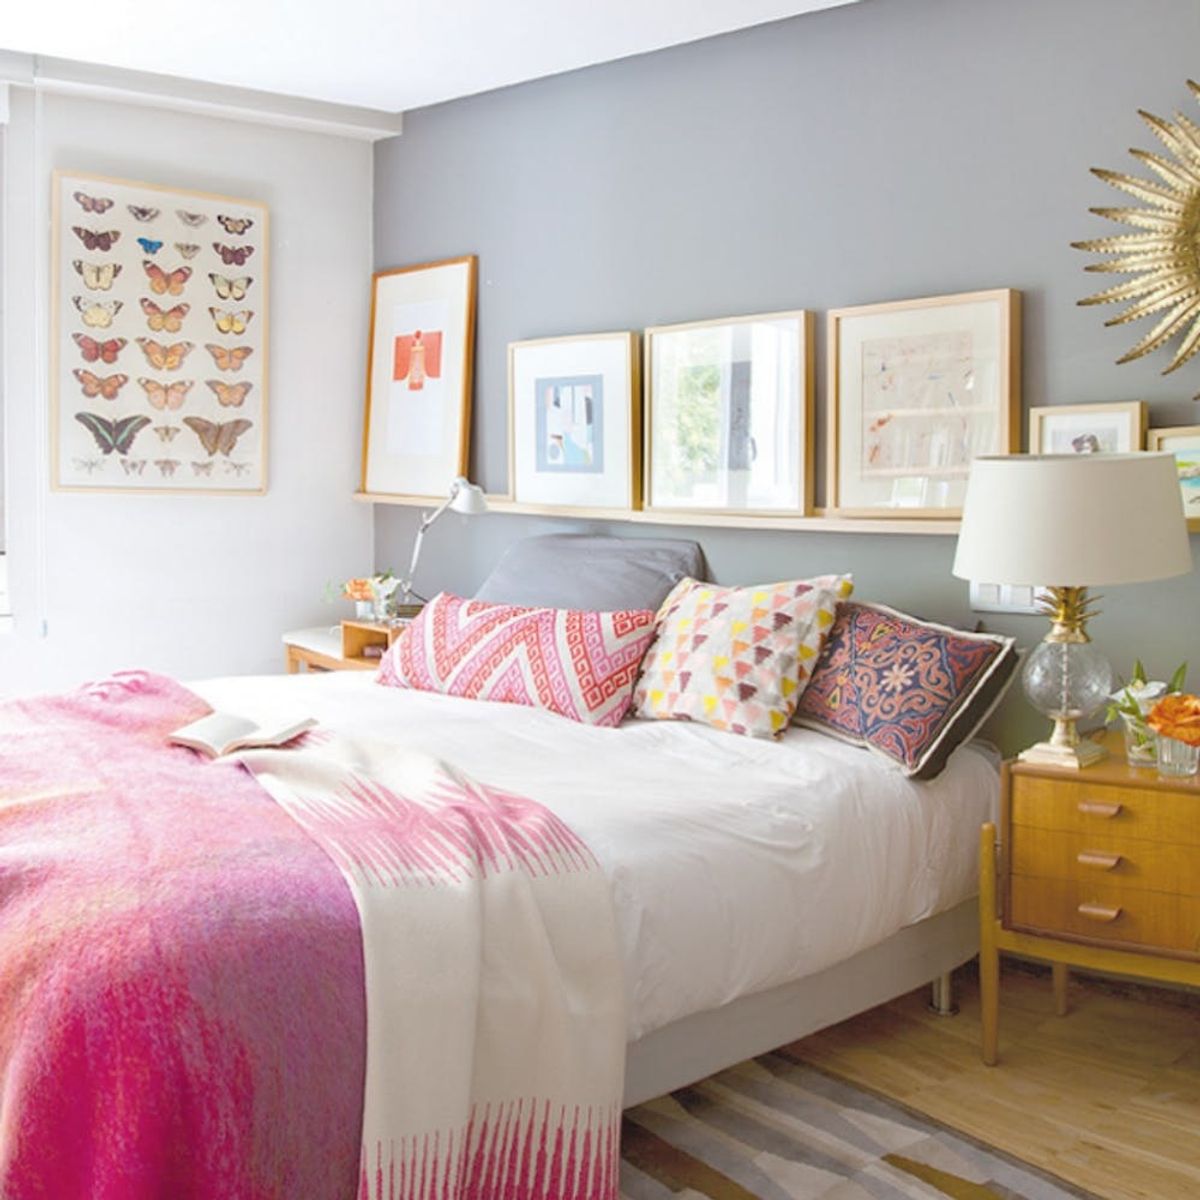 9 Ways to Make the Most Out of Your Tiny Bedroom Space